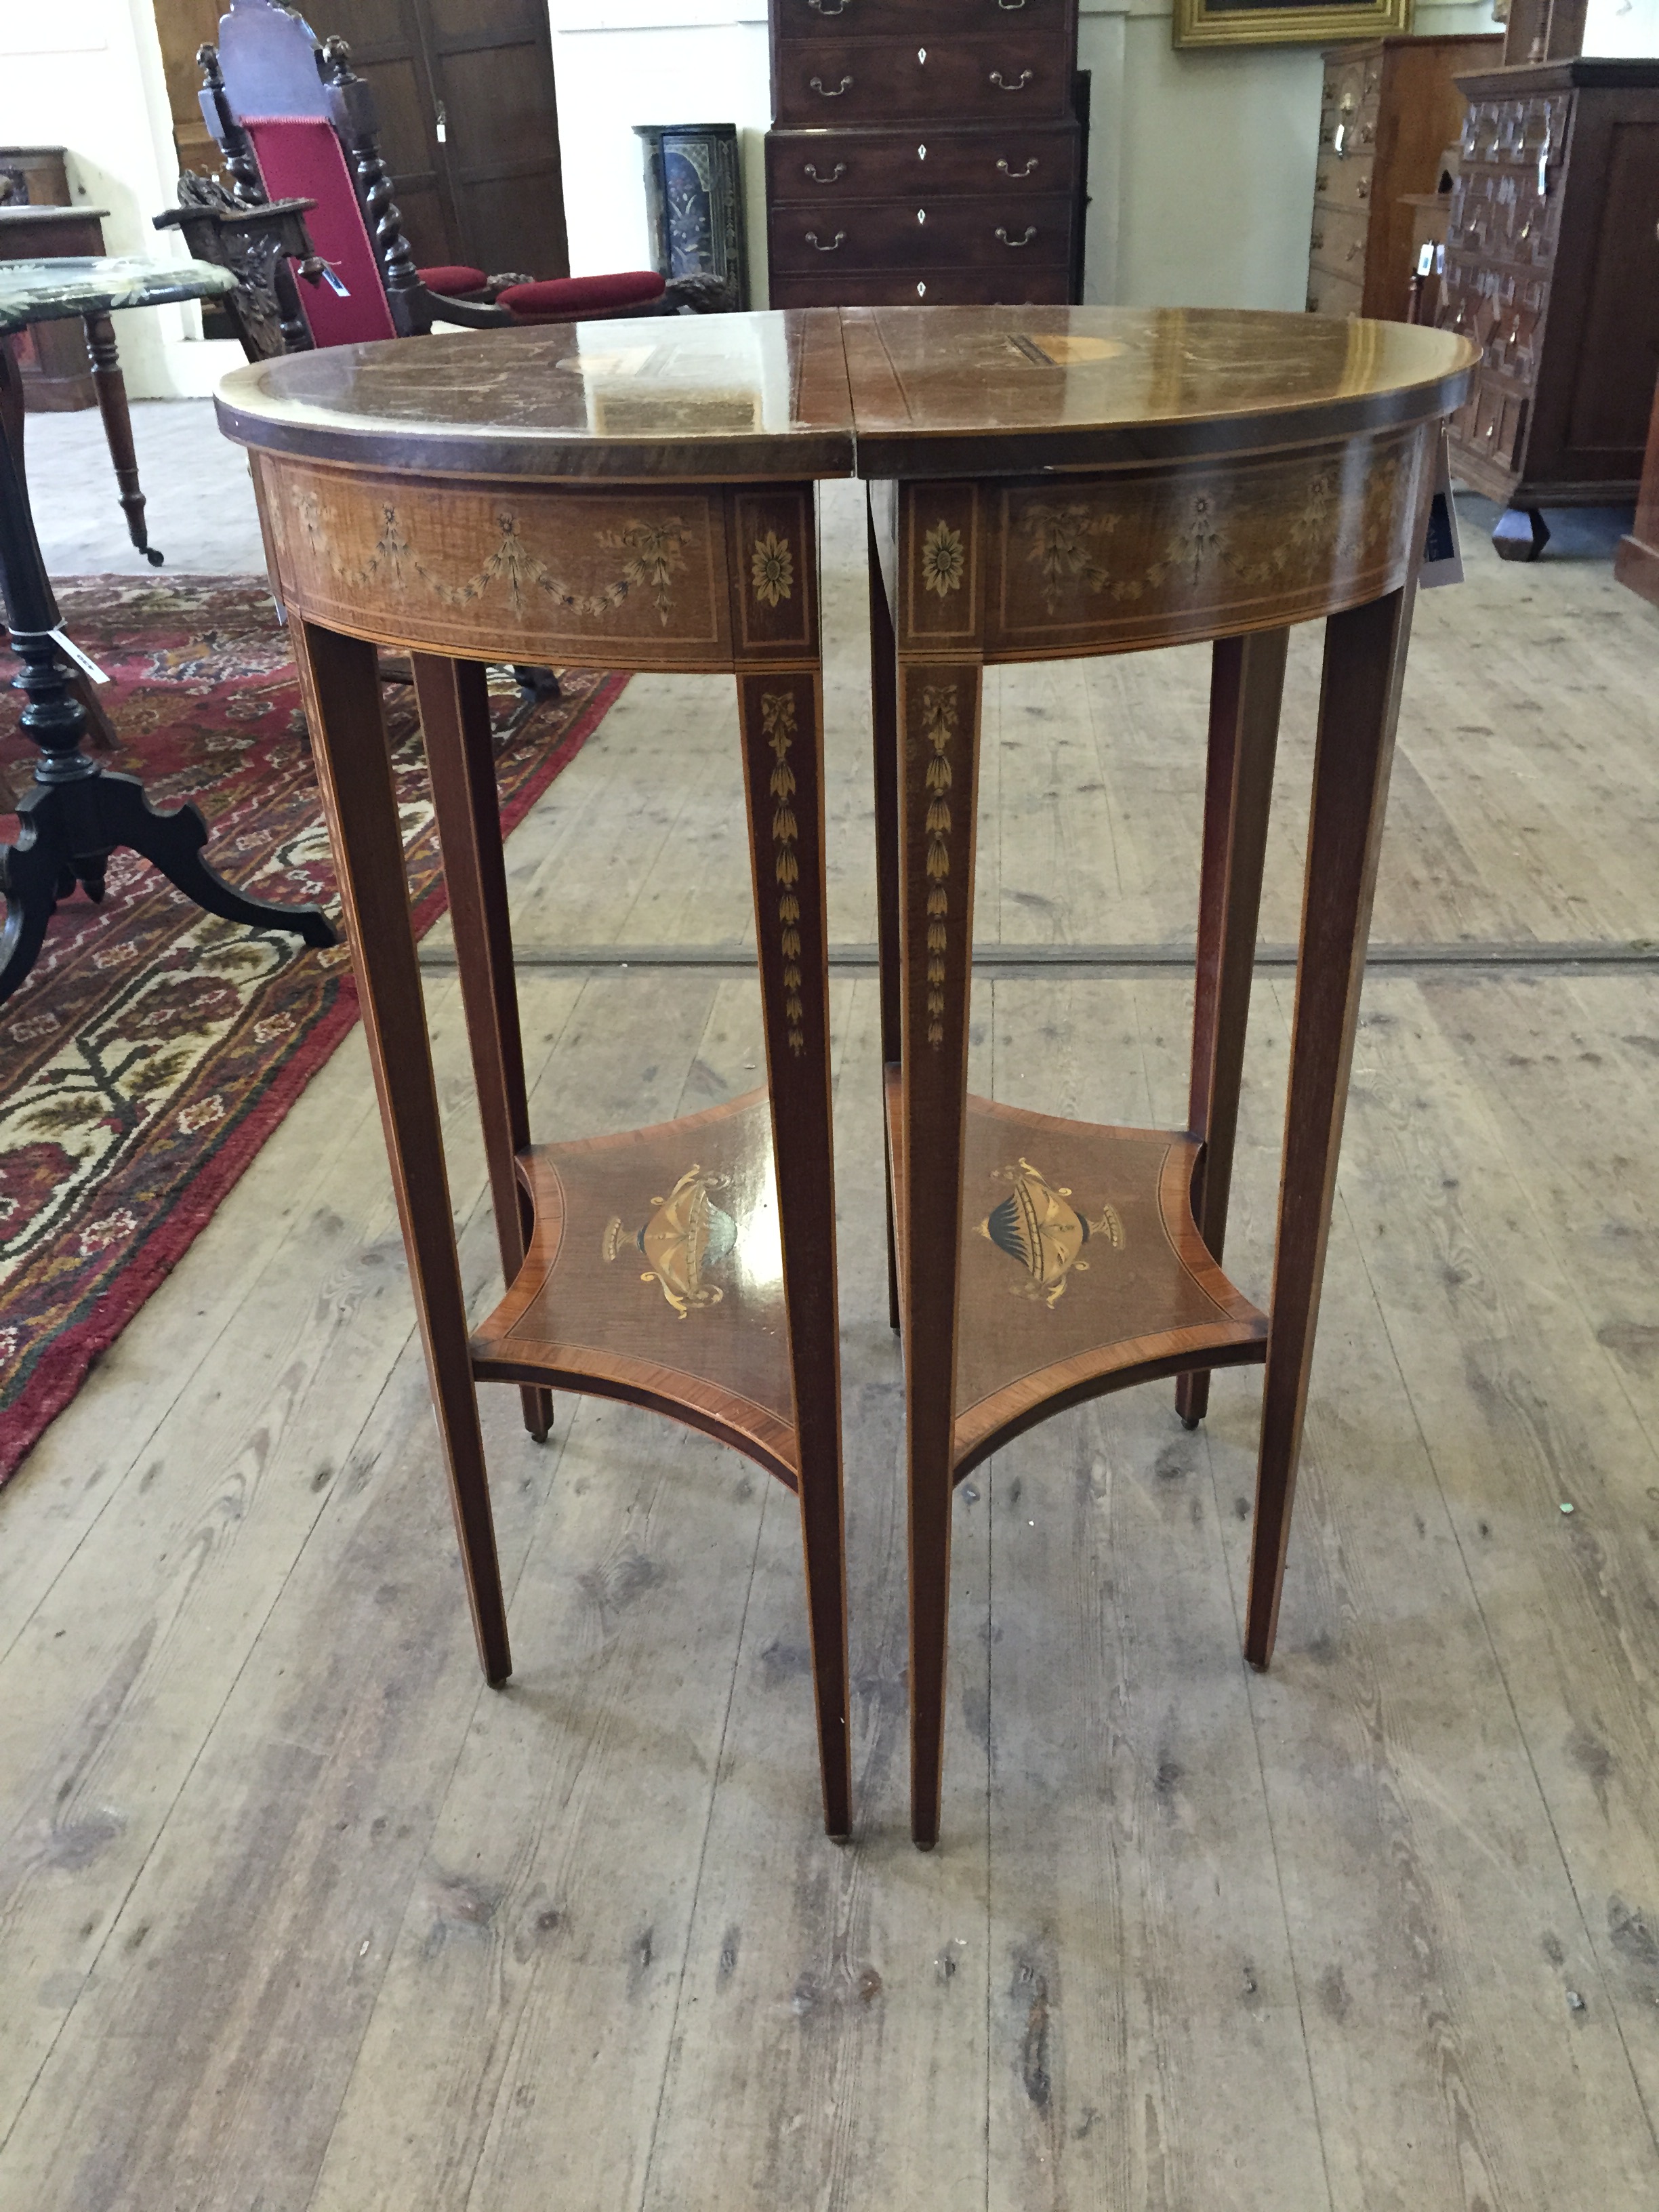 A pair of Edwardian demi-lune hall tables, the tops inlaid with a twin handled vase surrounded by - Image 7 of 22